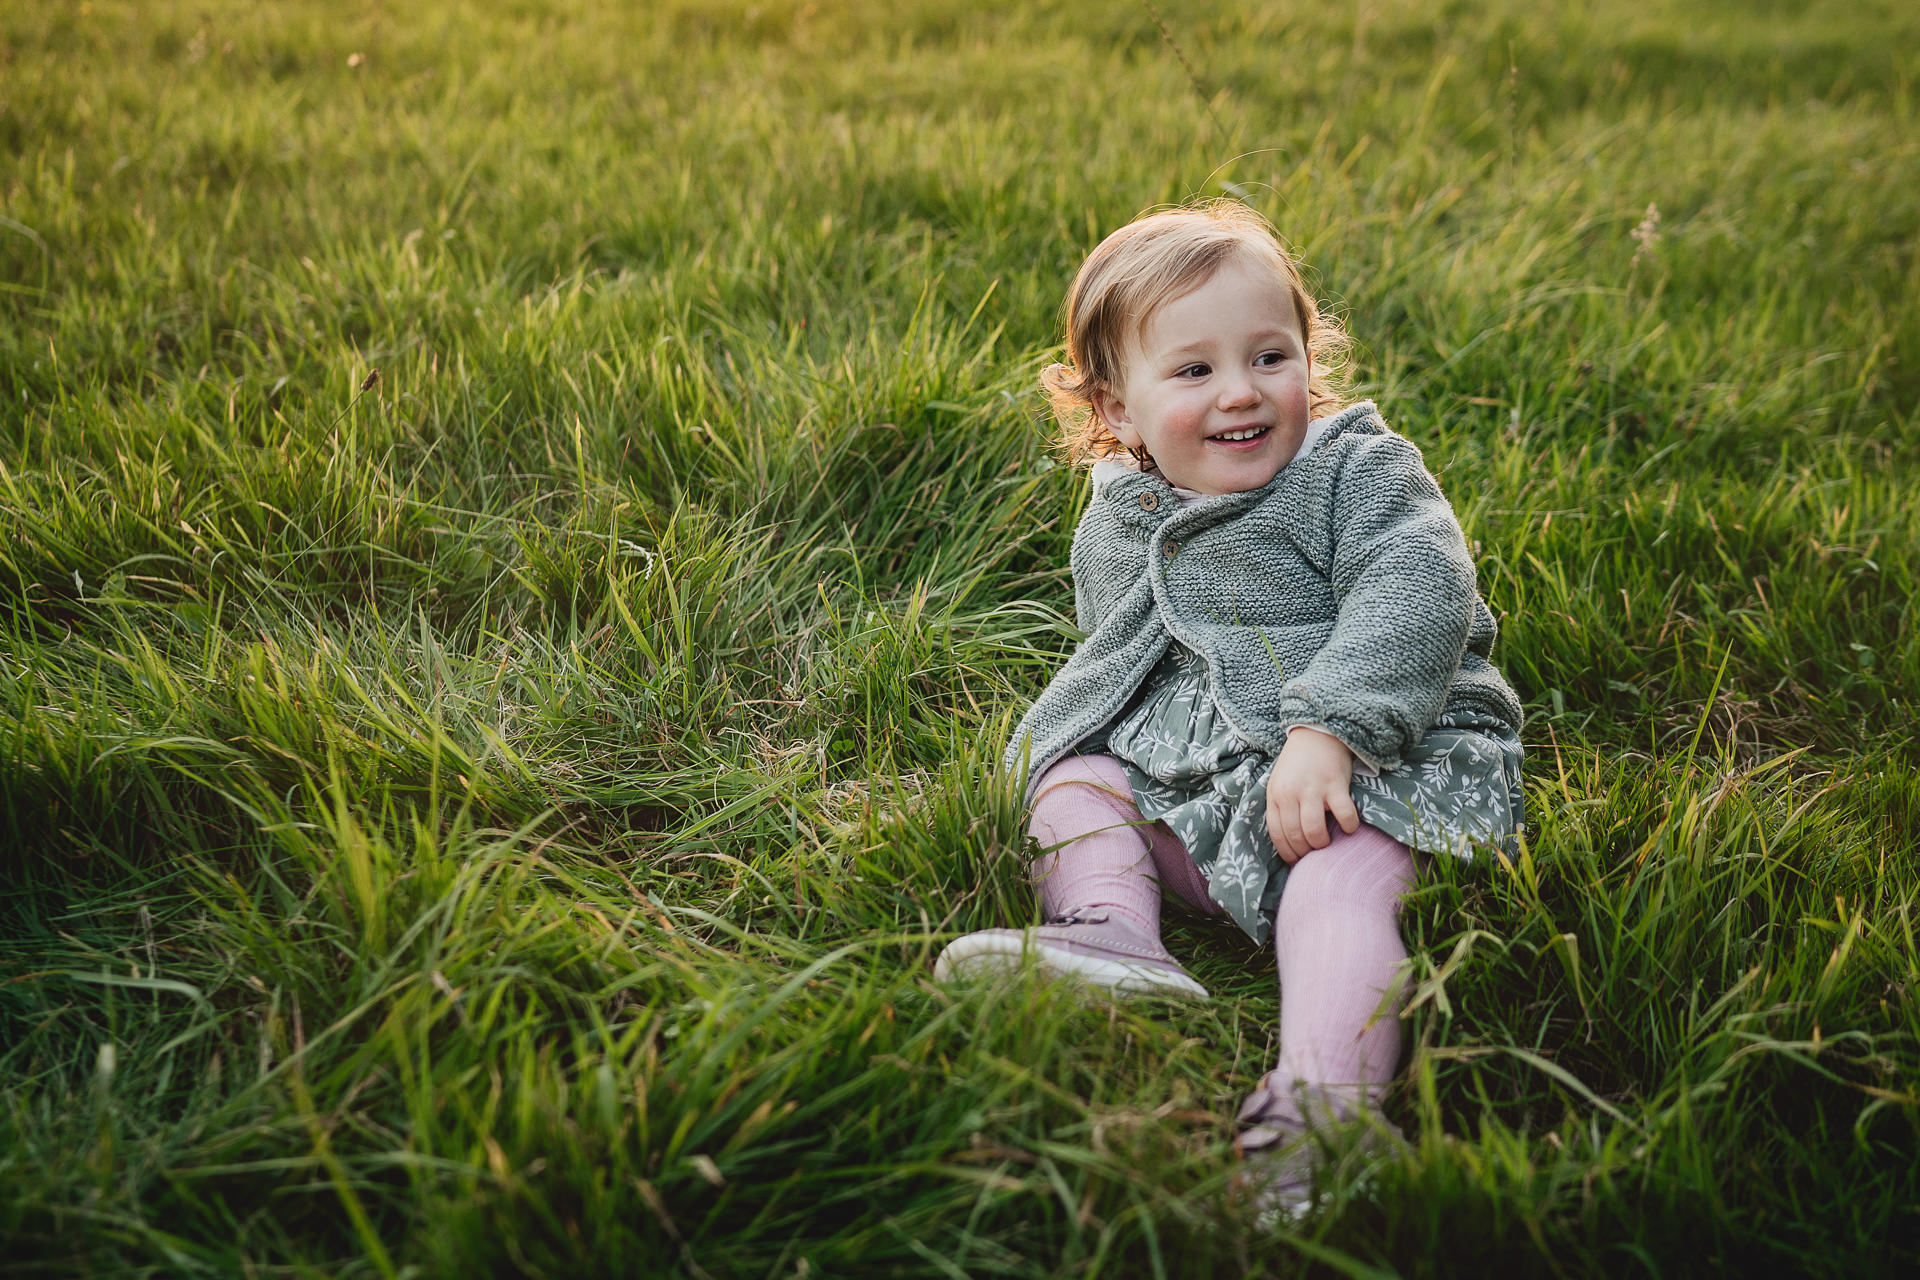 A toddler girl smiling in a field at sunset